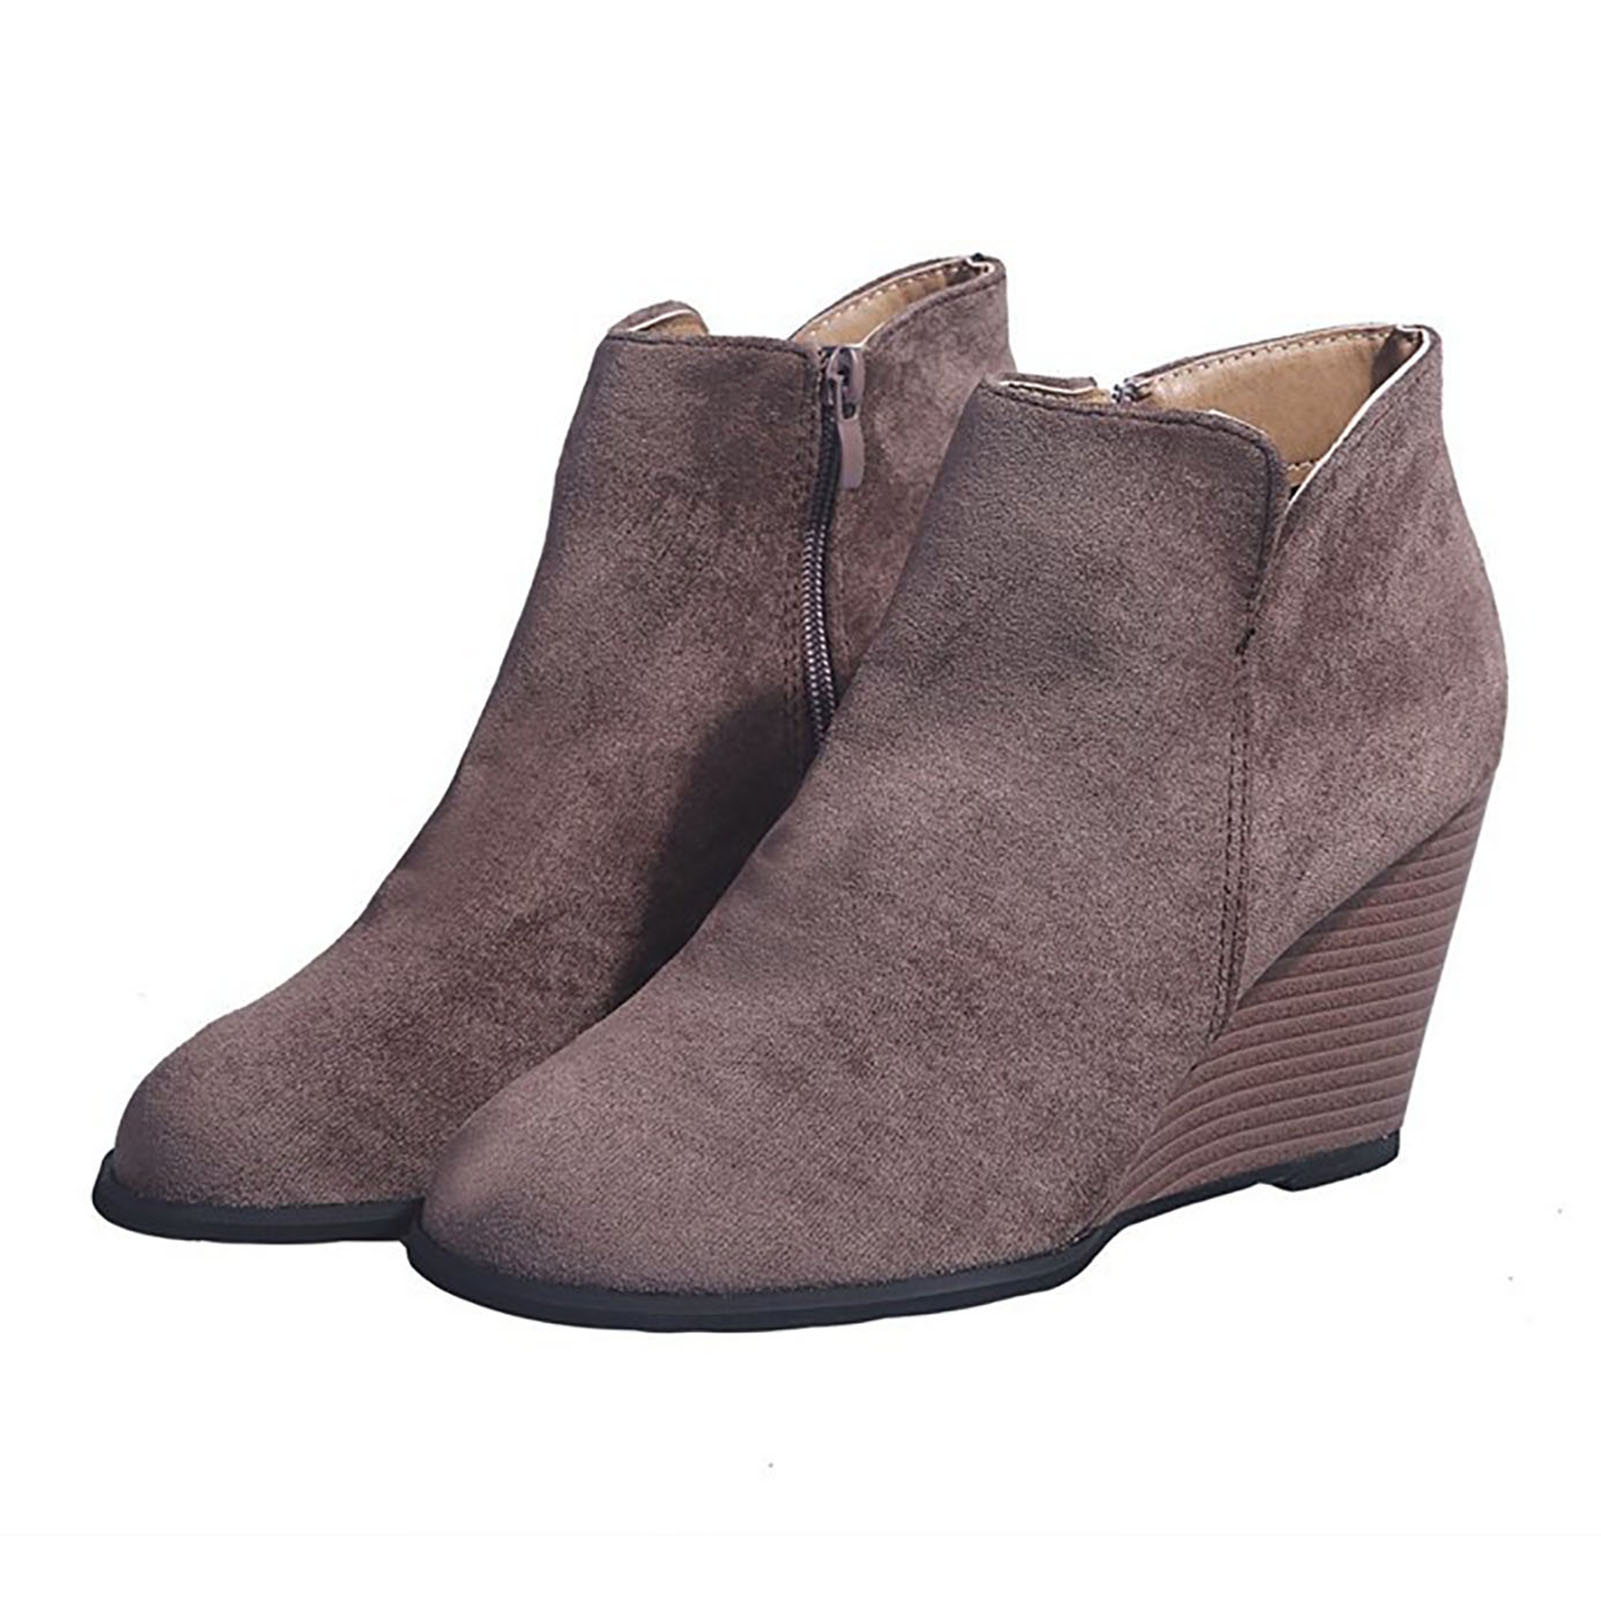 Women Autumn Winter Warm Closed Toe Side Zipper Wedge Suede Ankle Boots Shoes - coffee, 36